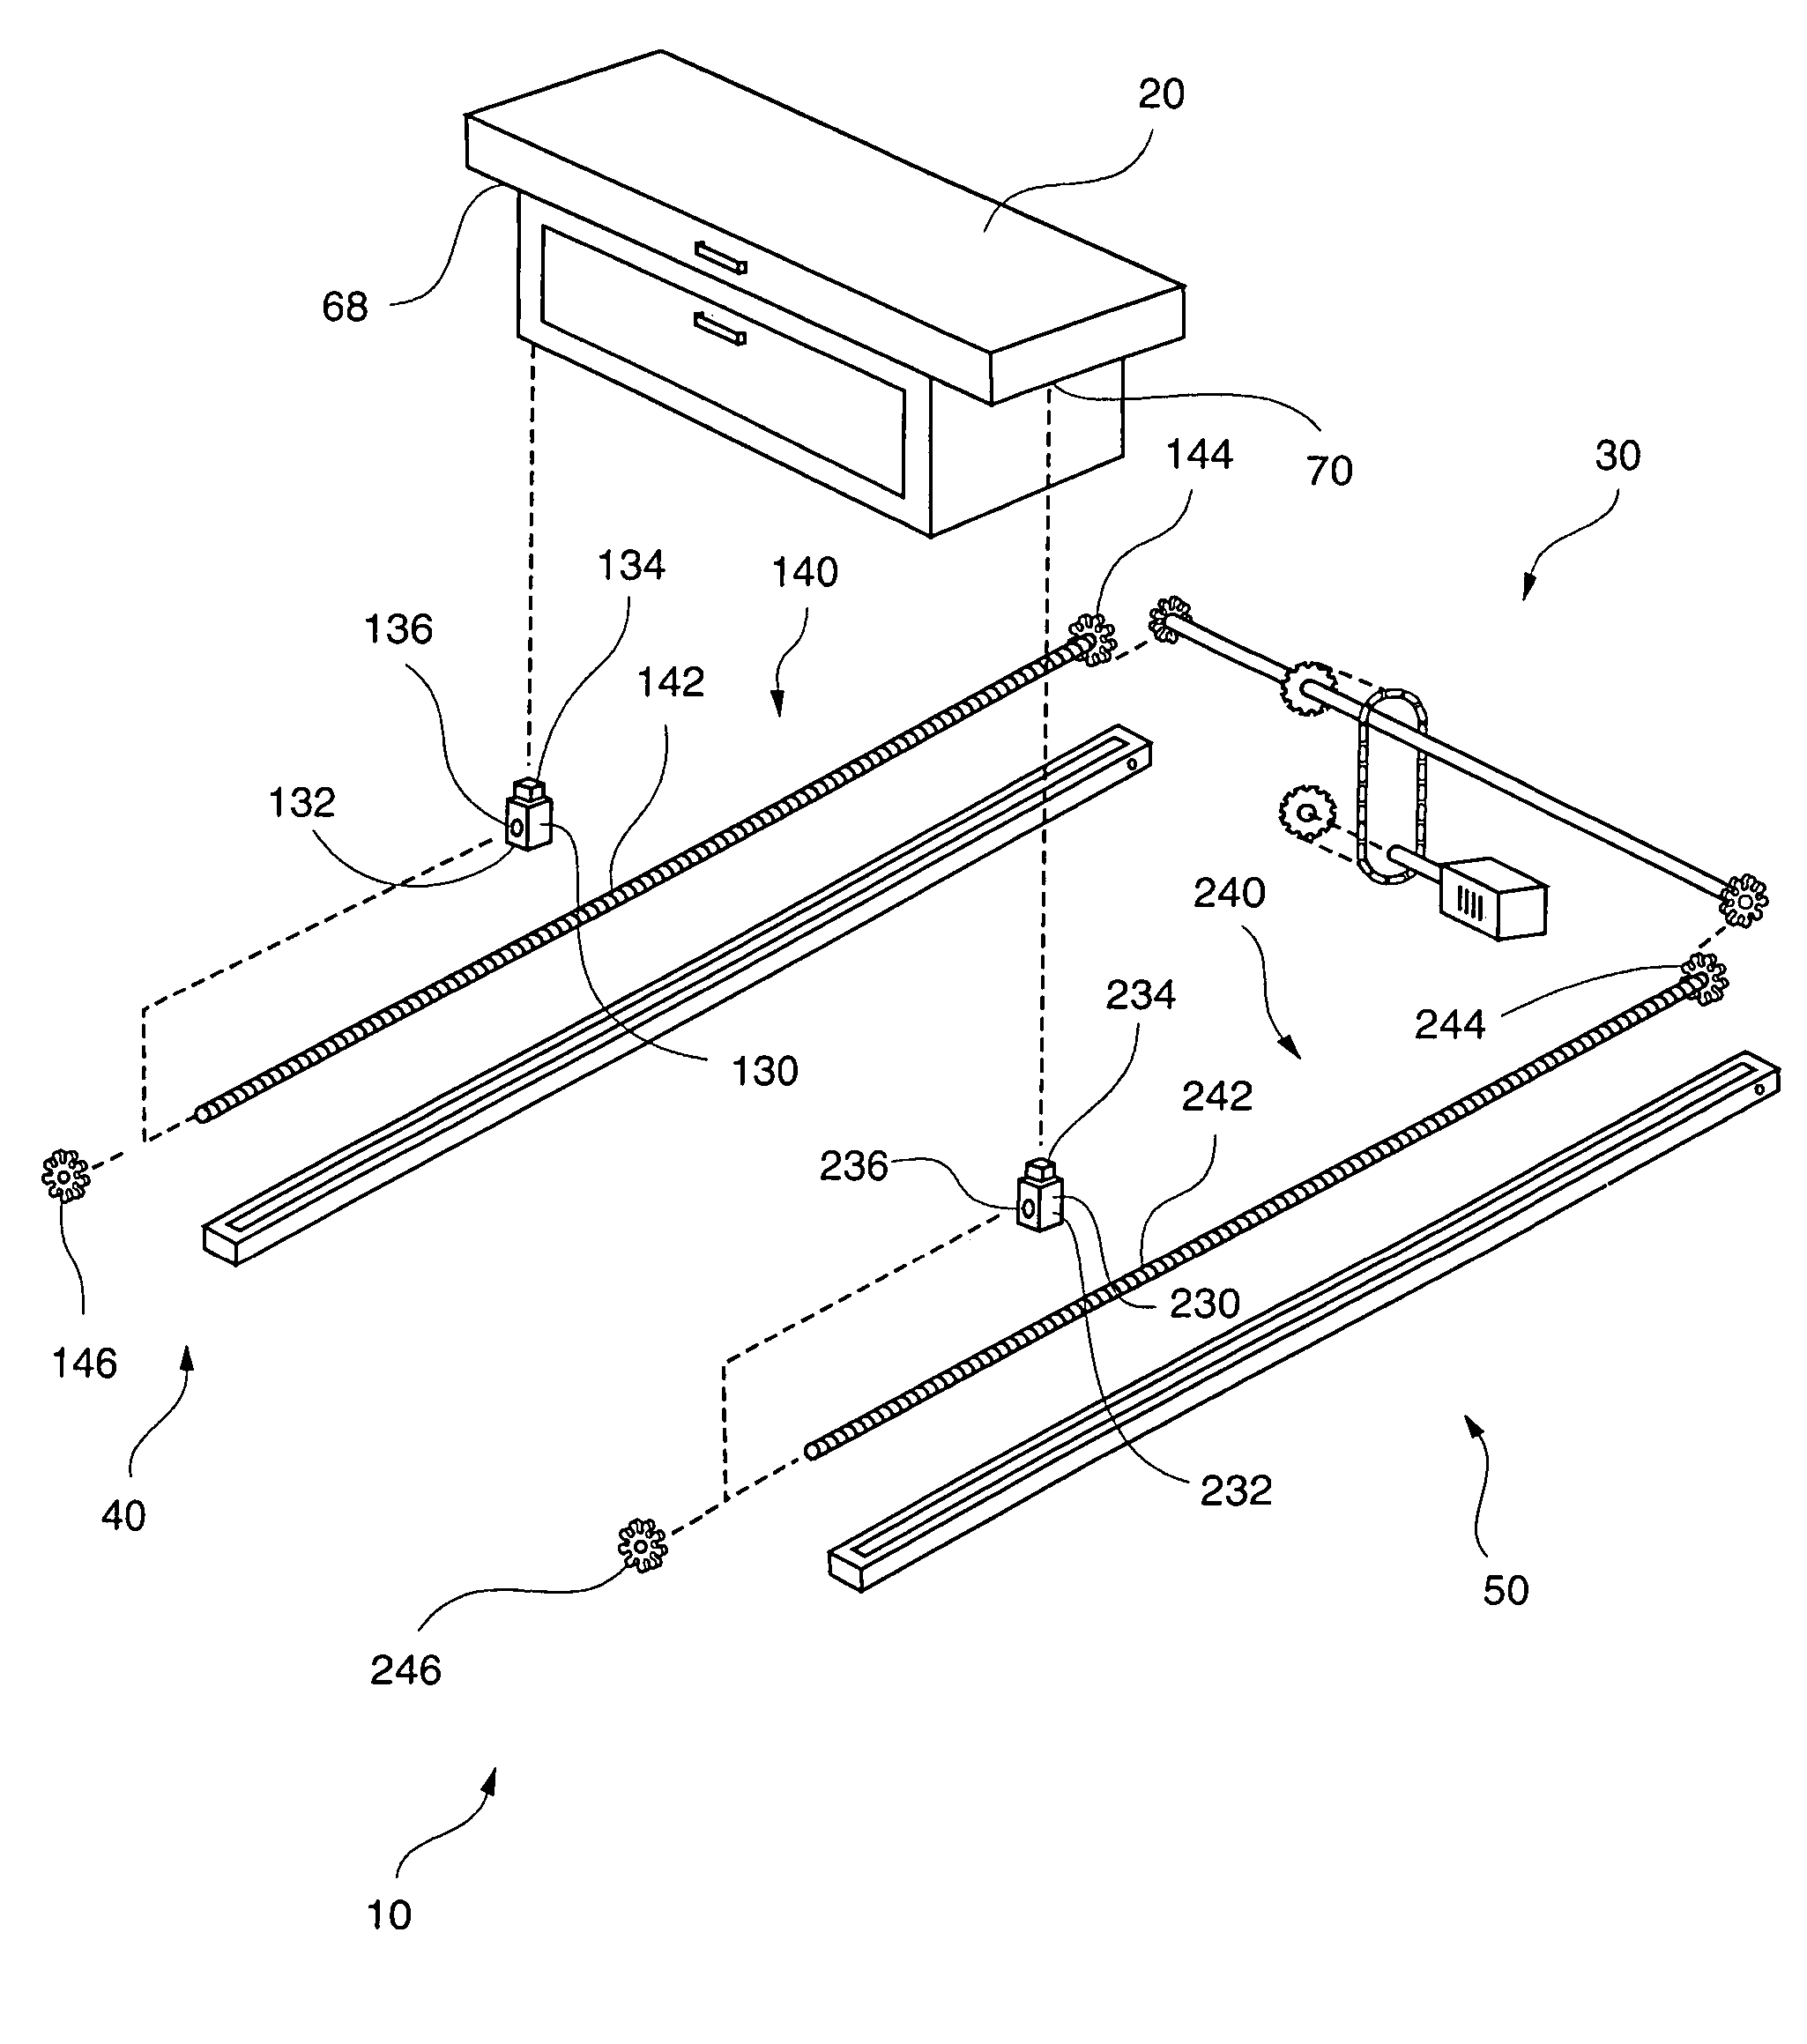 Cargo box assembly and method of use thereof